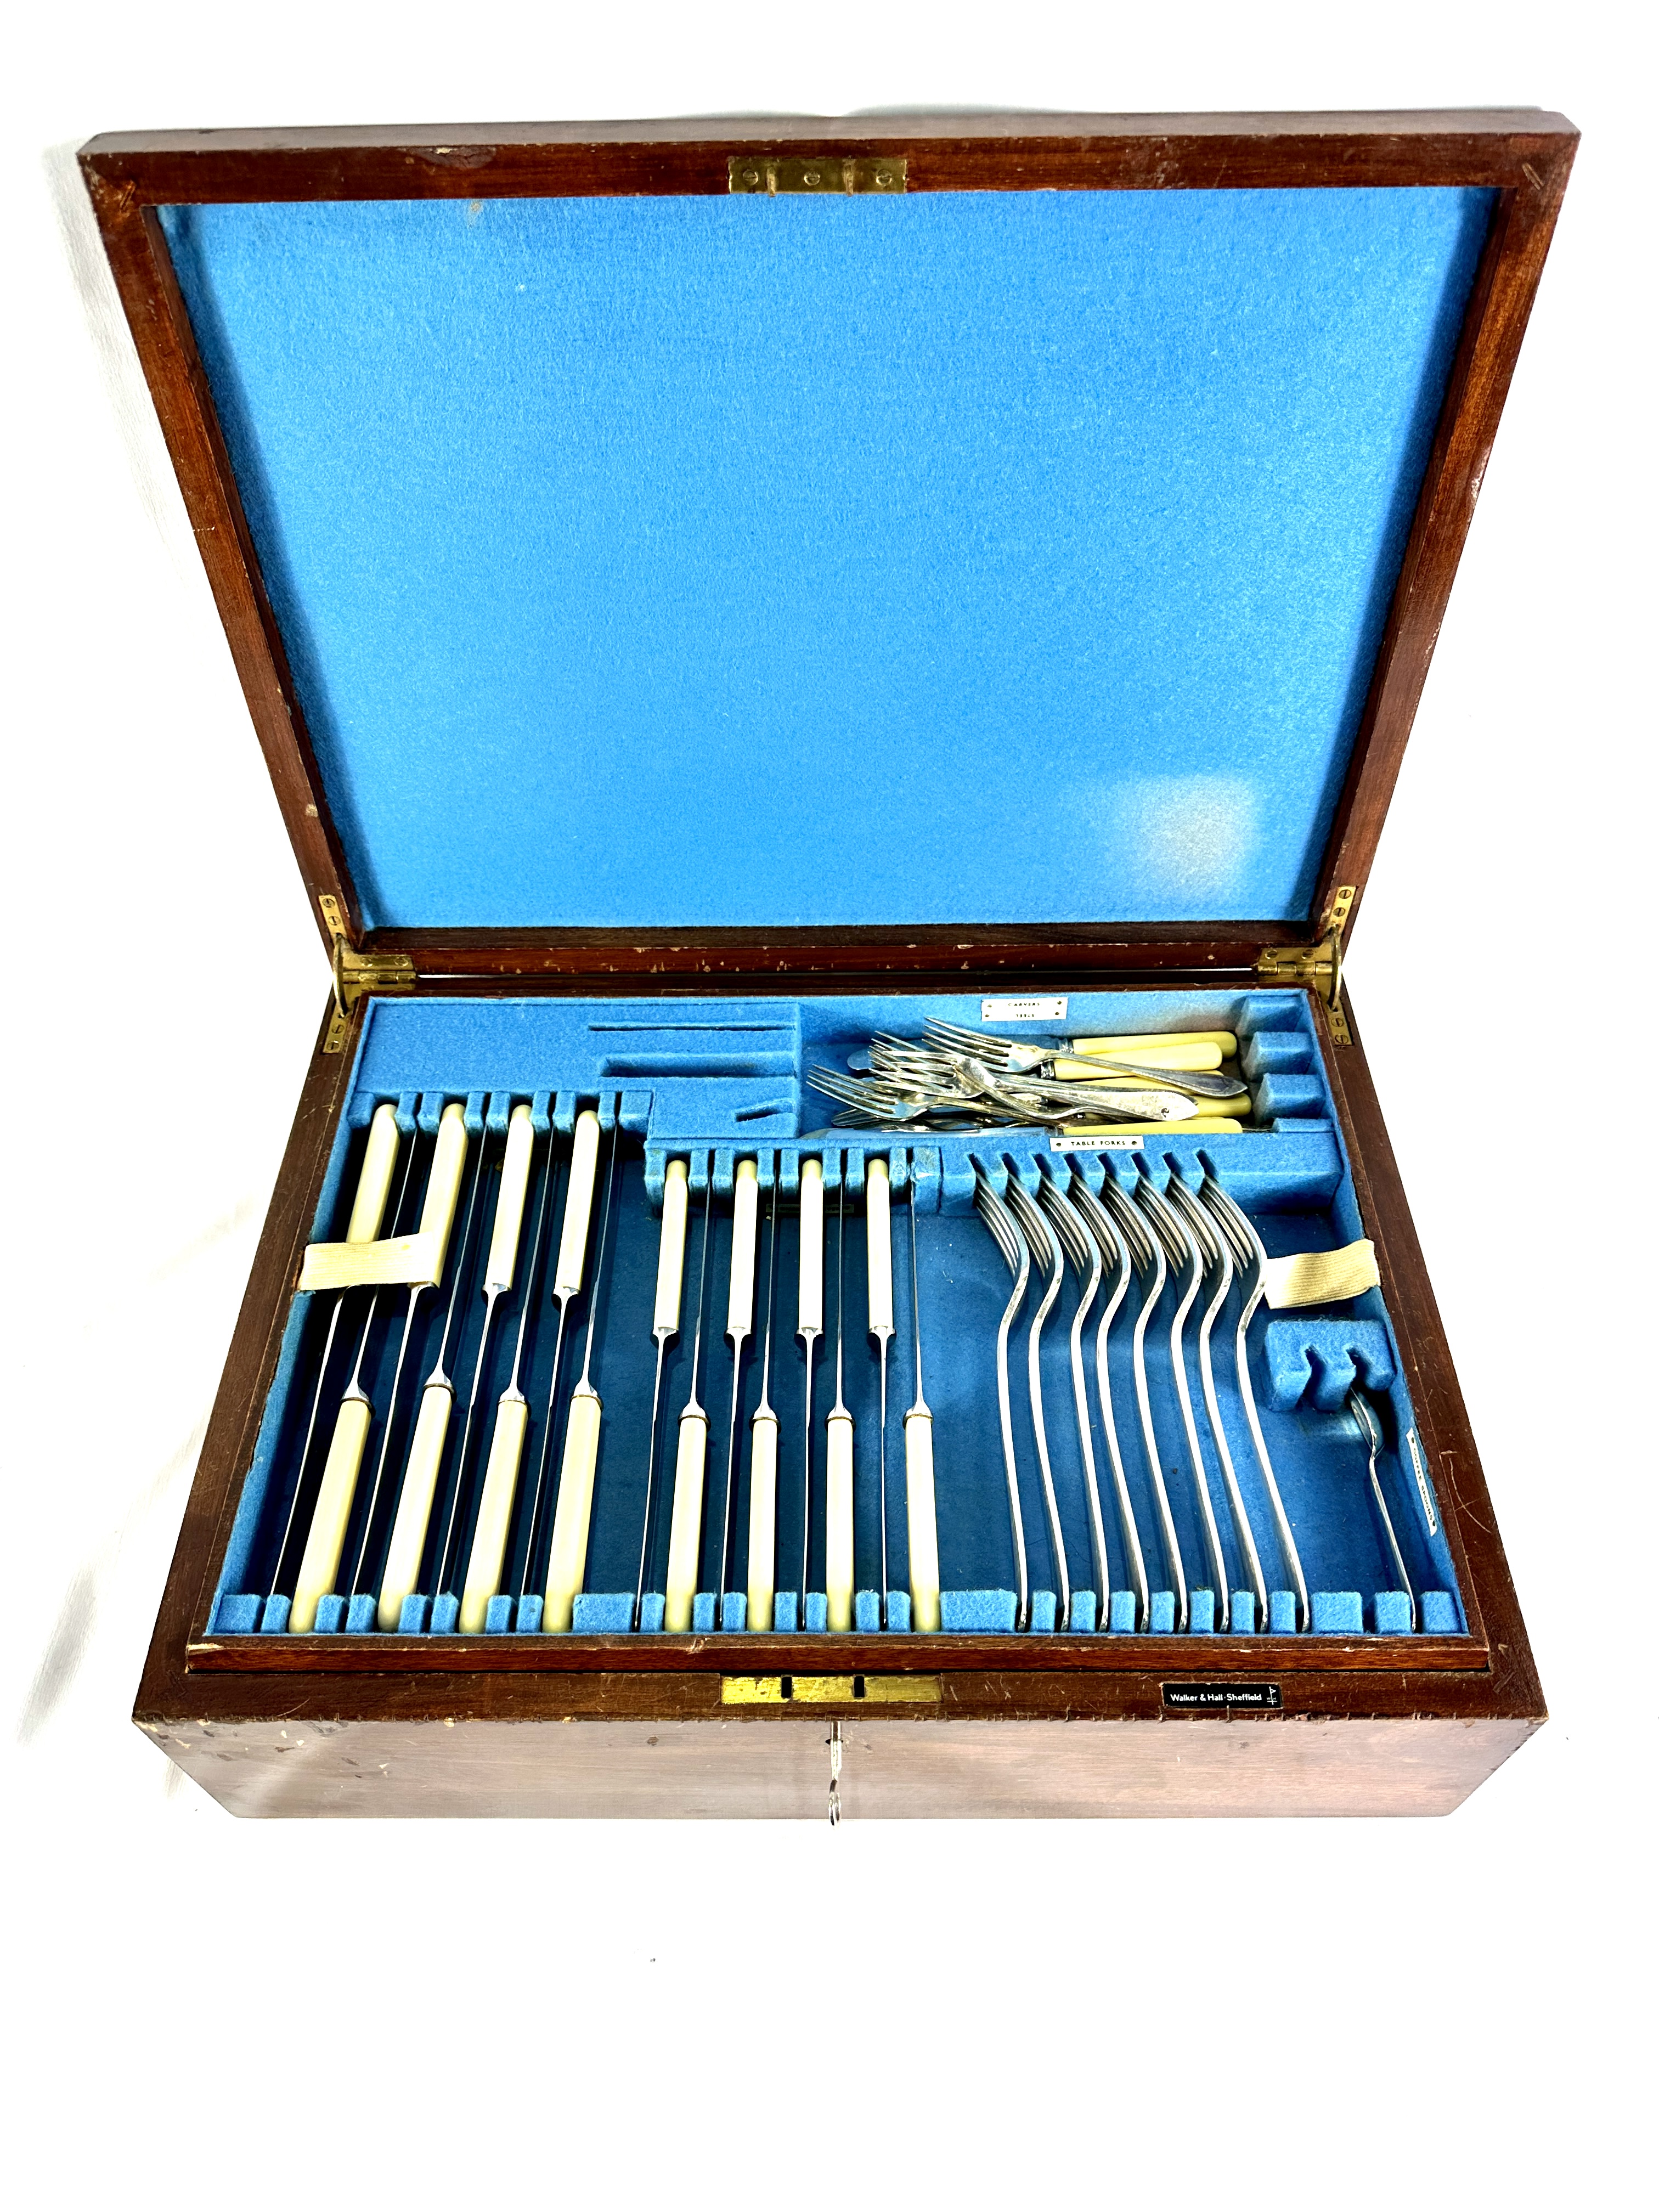 Mahogany box containing a Walker & Hall part canteen of silver plate cutlery